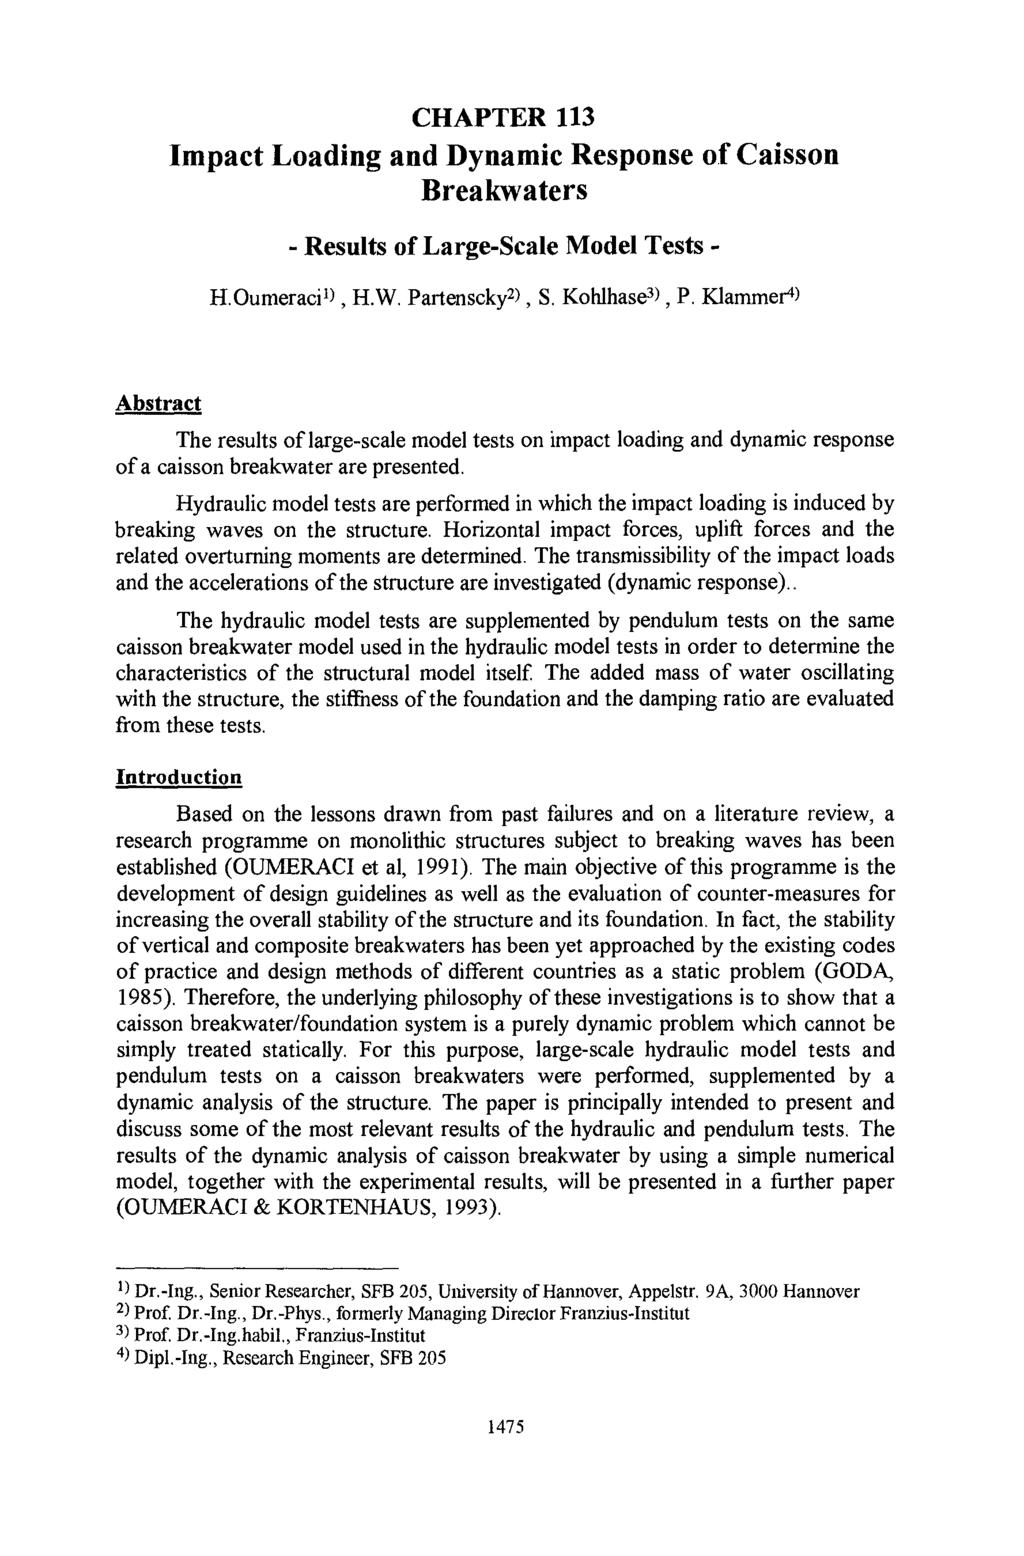 CHAPTER 113 Impact Loading and Dynamic Response of Caisson Breakwaters - Results of Large-Scale Model Tests - H.Oumeraci 1 ), H.W. Partenscky 2 ), S. Kohlhase 3 ), P.